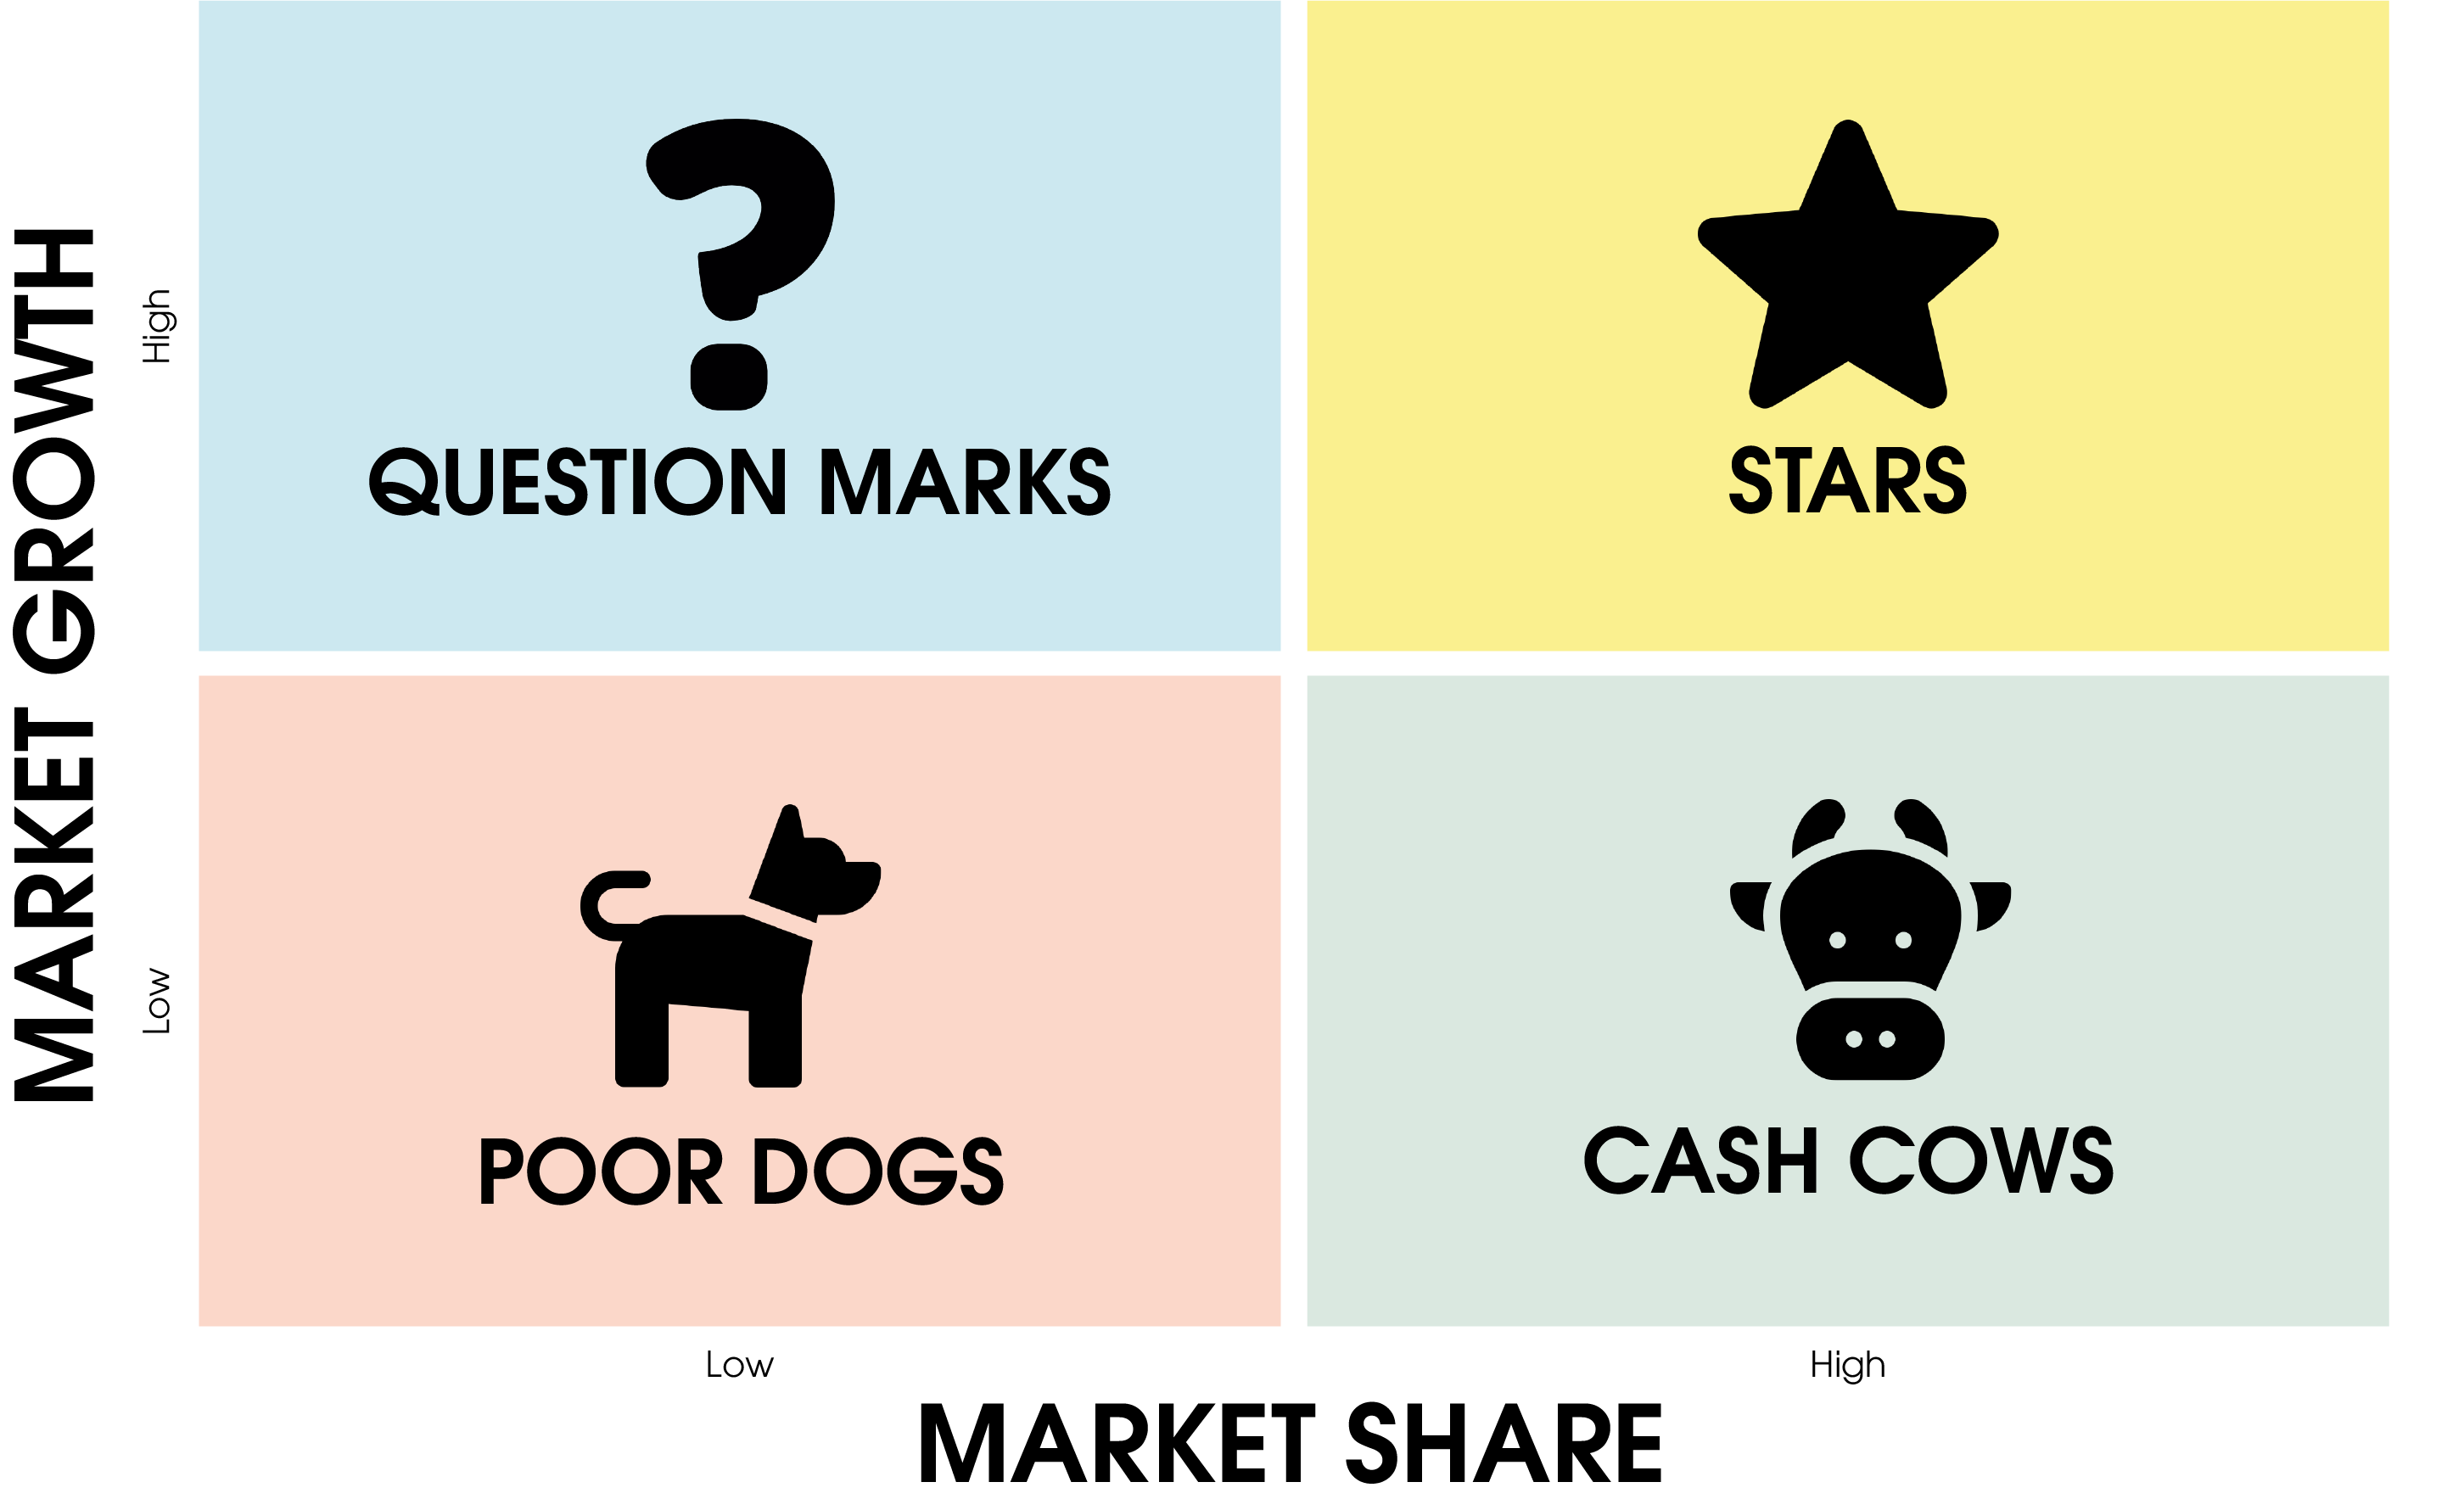 The graphic shows the Boston Consulting Matrix. Market share is shown from left to right, from low to high. Market growth is shown from bottom to top, from low to high. With a question mark icon, these are shown on the top left with low market share and high market growth. To the right are the stars with high market share and high growth. Below that, the Cash Cows are shown with an icon of a cow's head. With low market share and market growth, the Poor Dogs are shown in the bottom left corner.